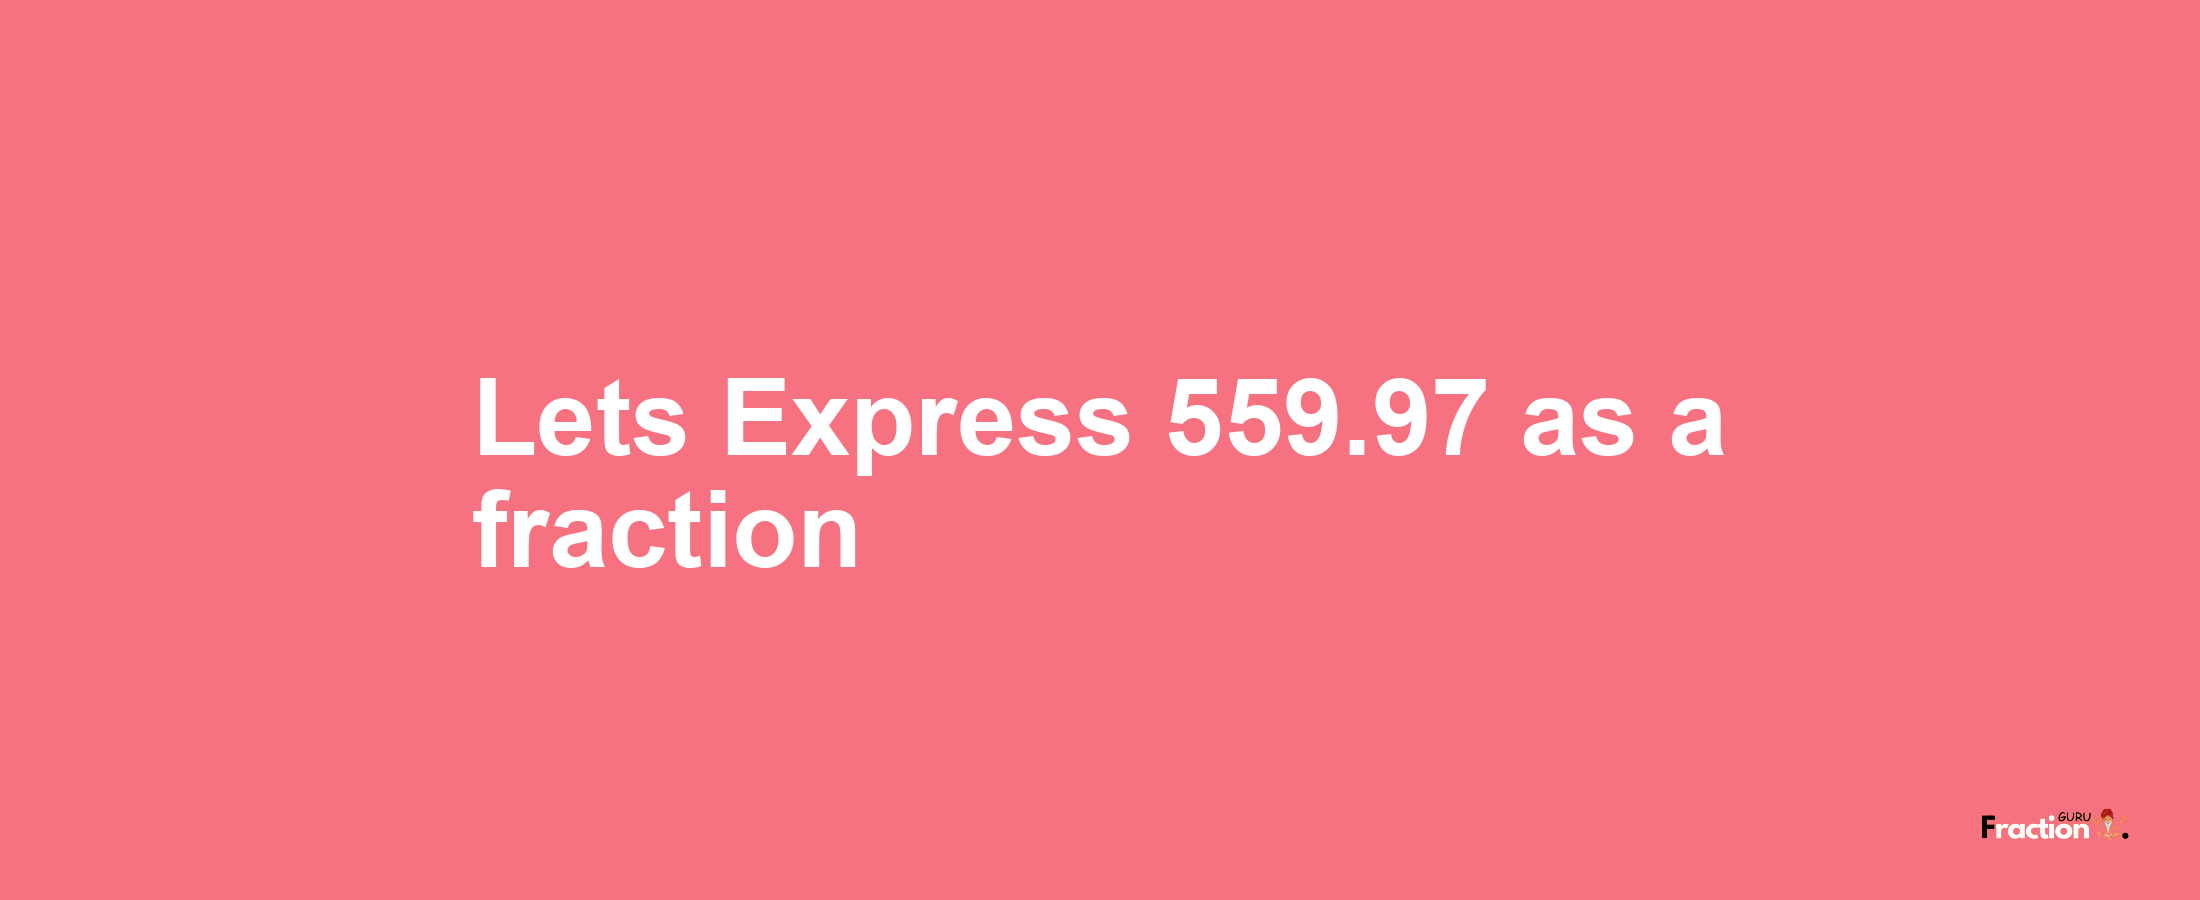 Lets Express 559.97 as afraction